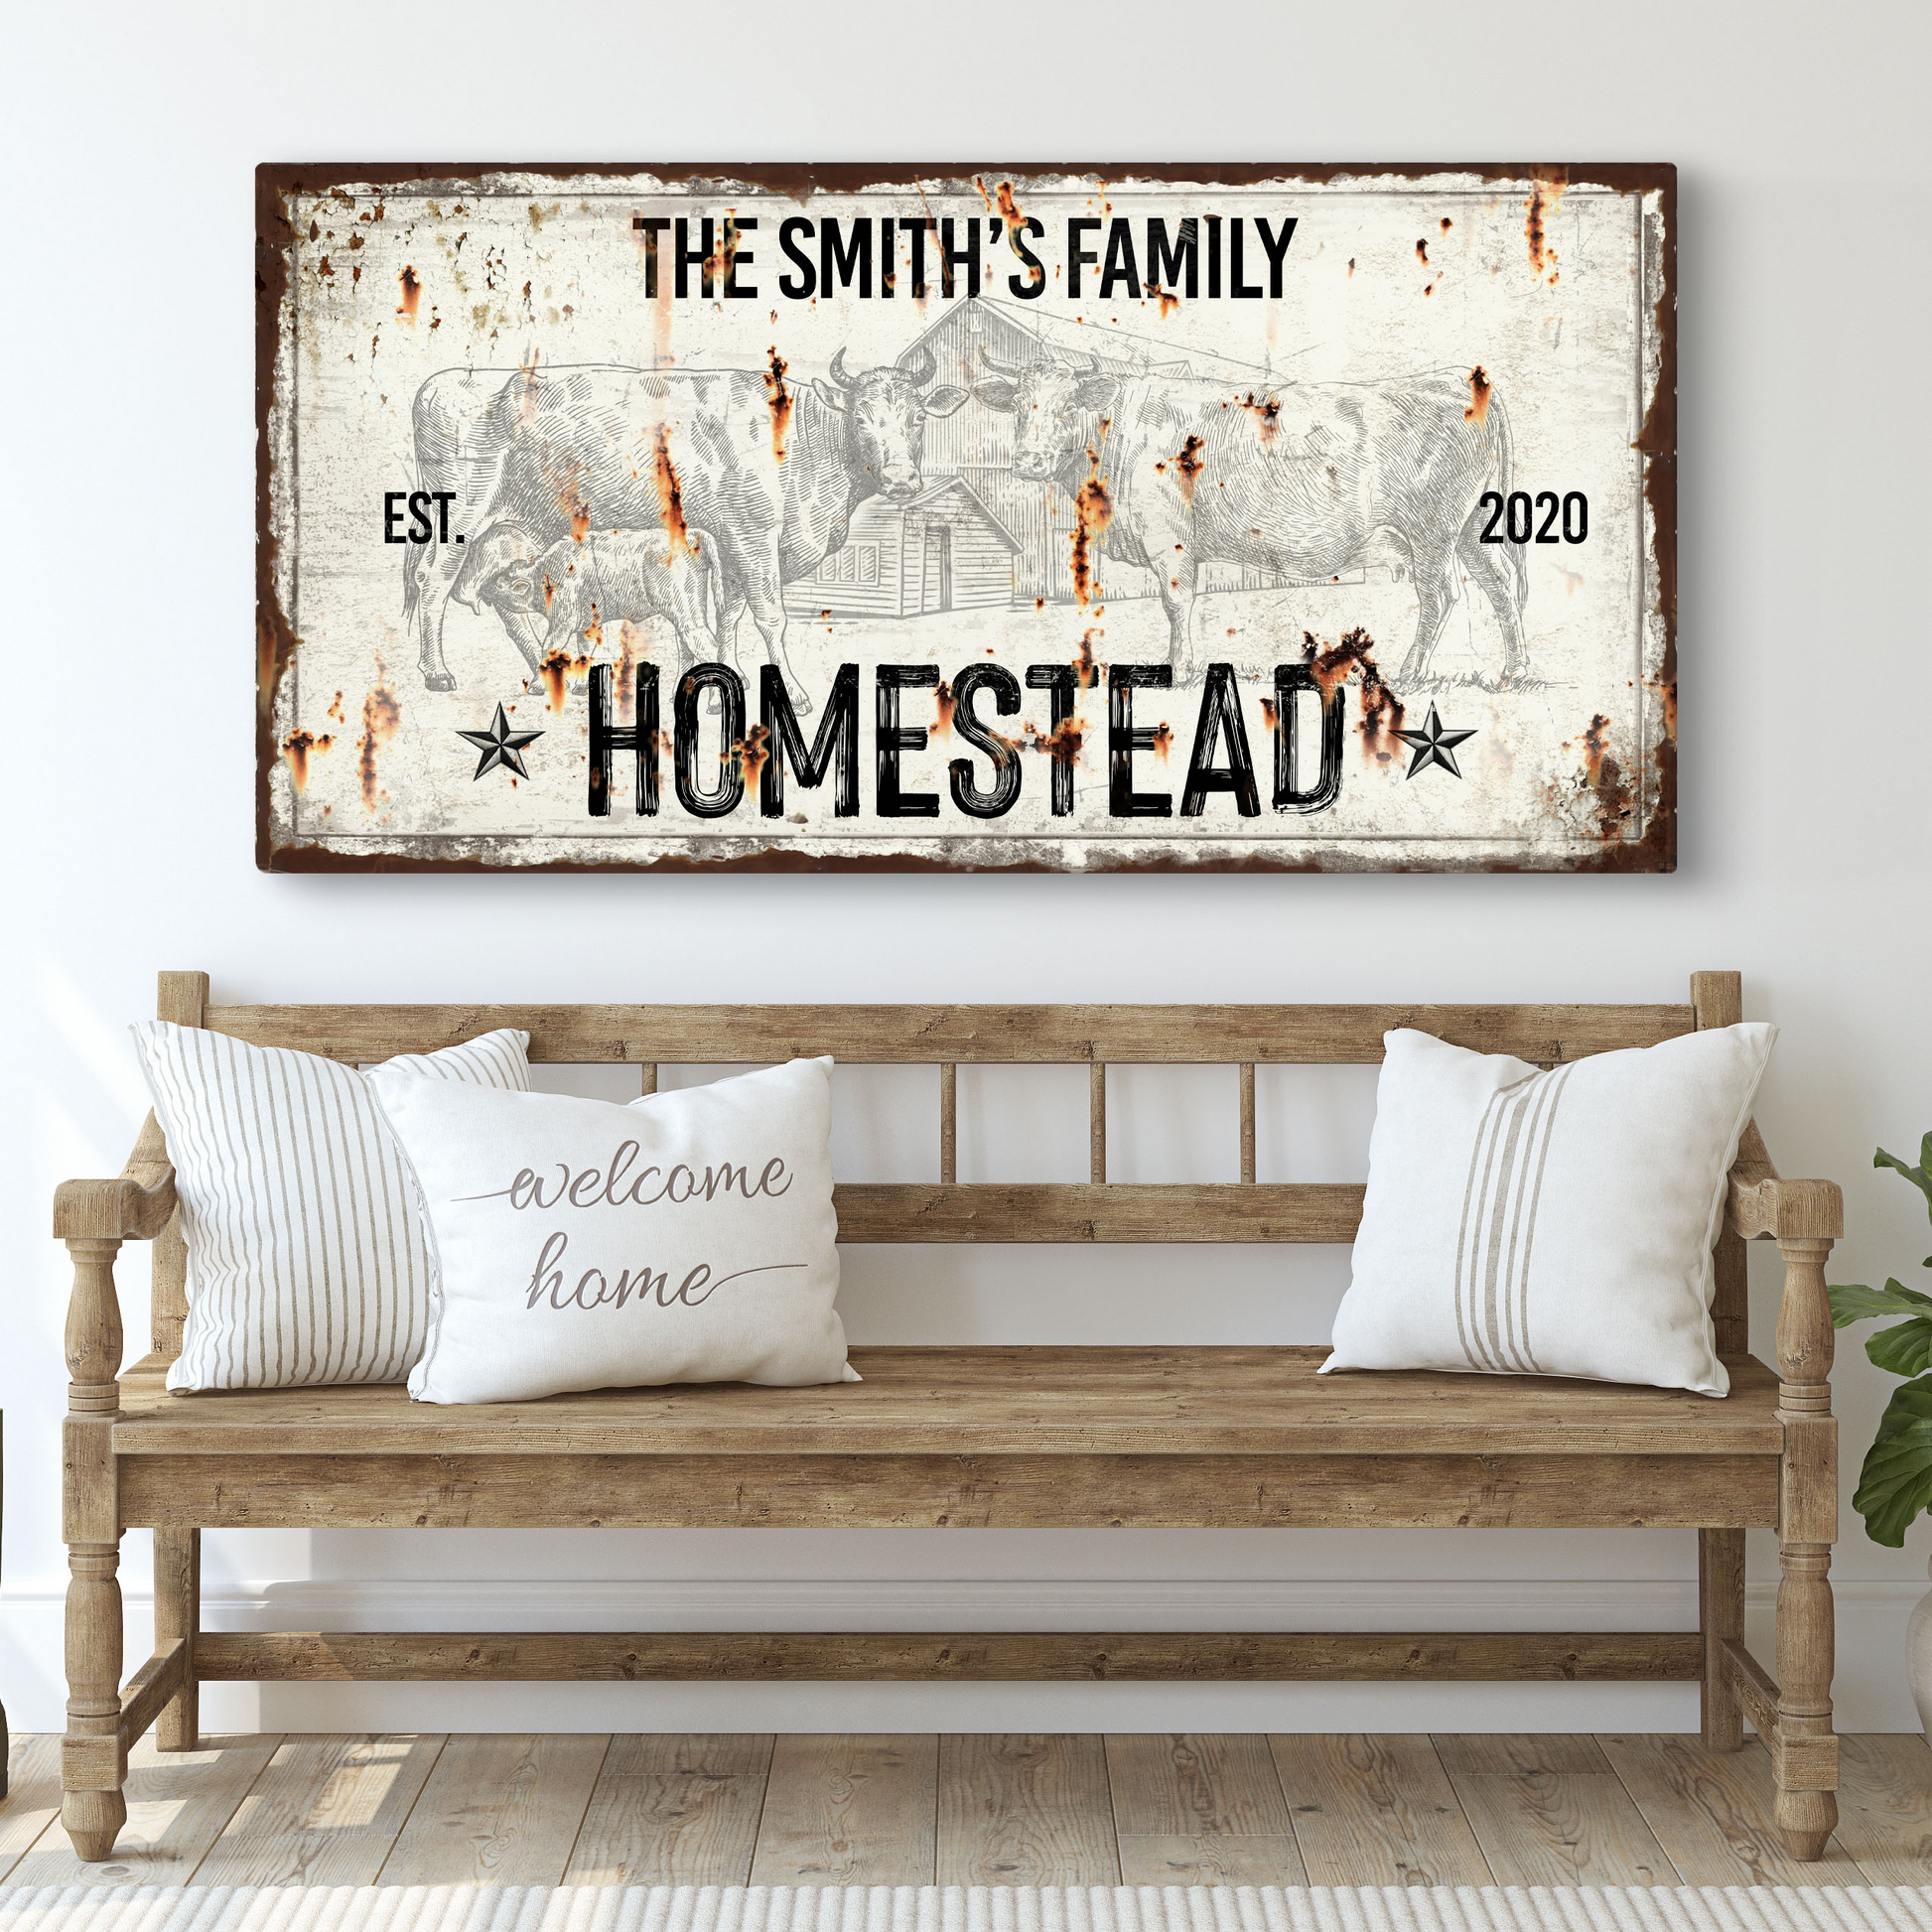 Homestead - Image by Tailored Canvases